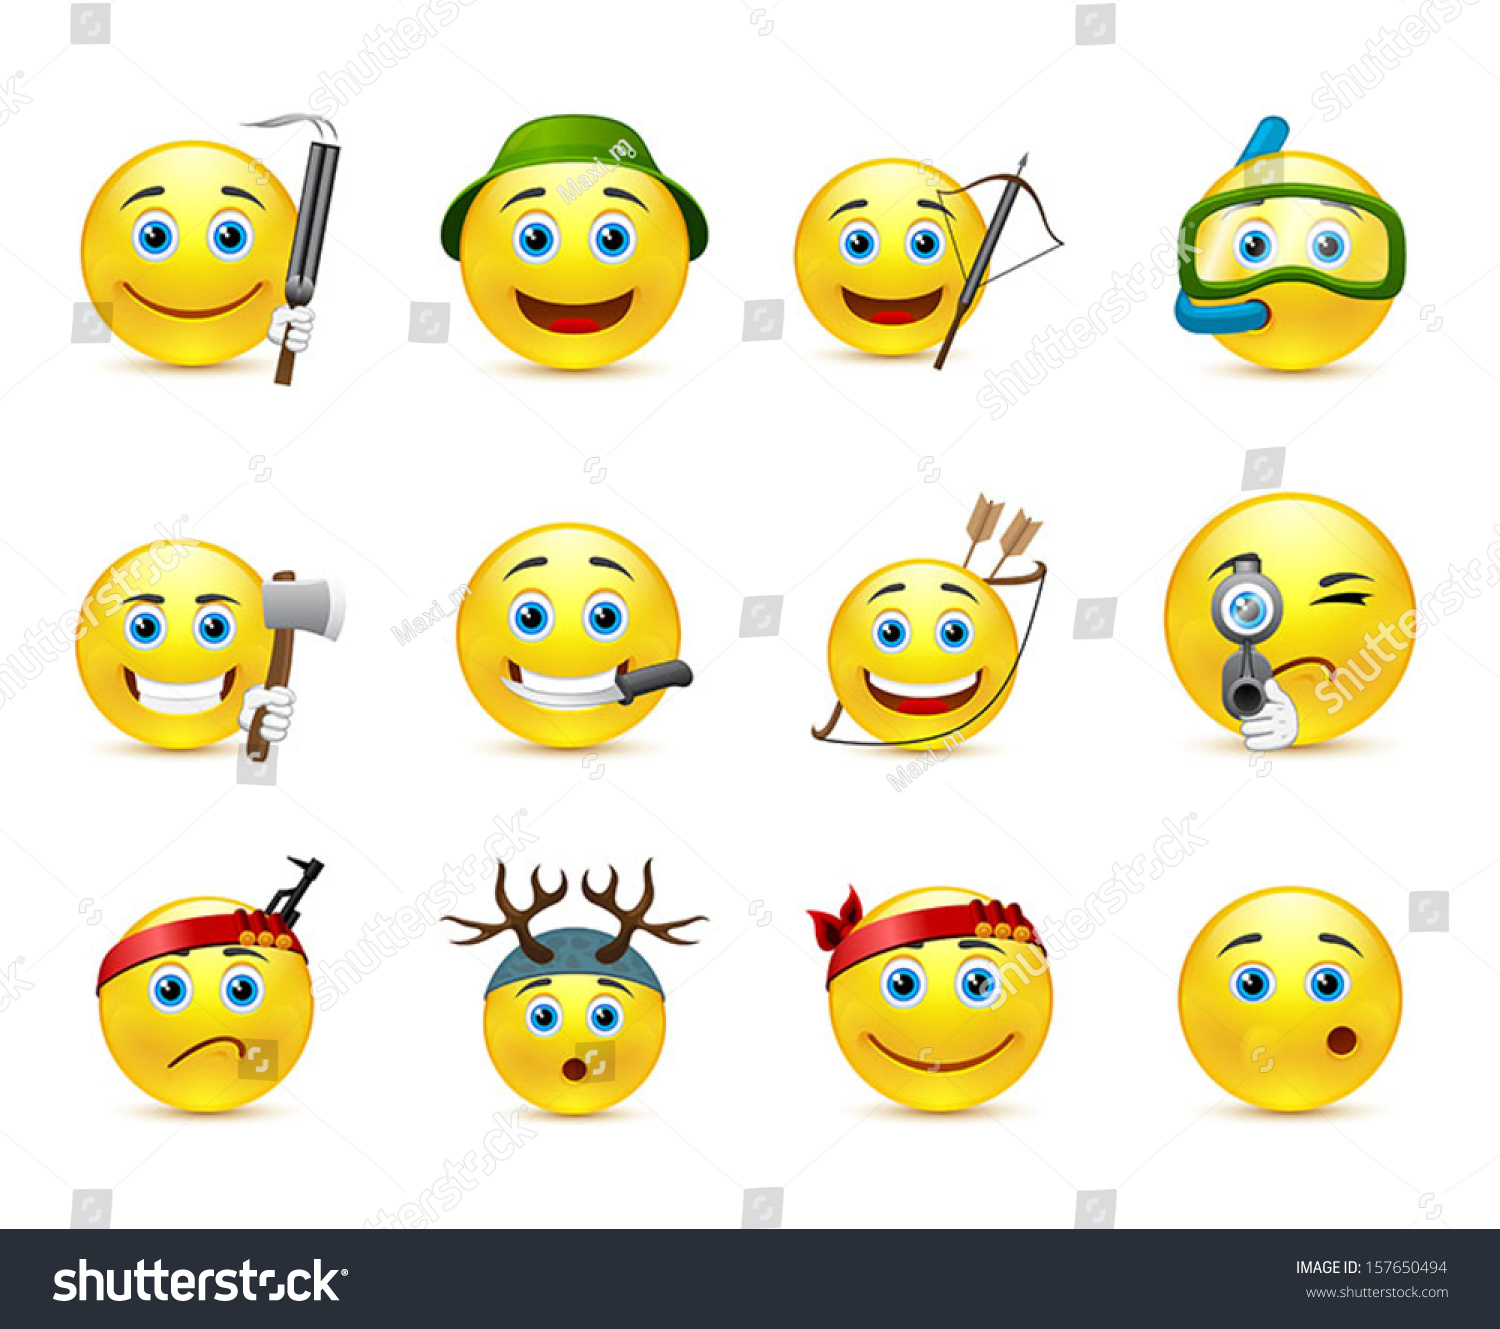 Adventure And Hunting Smiley Icon Set In Vector - 157650494 : Shutterstock